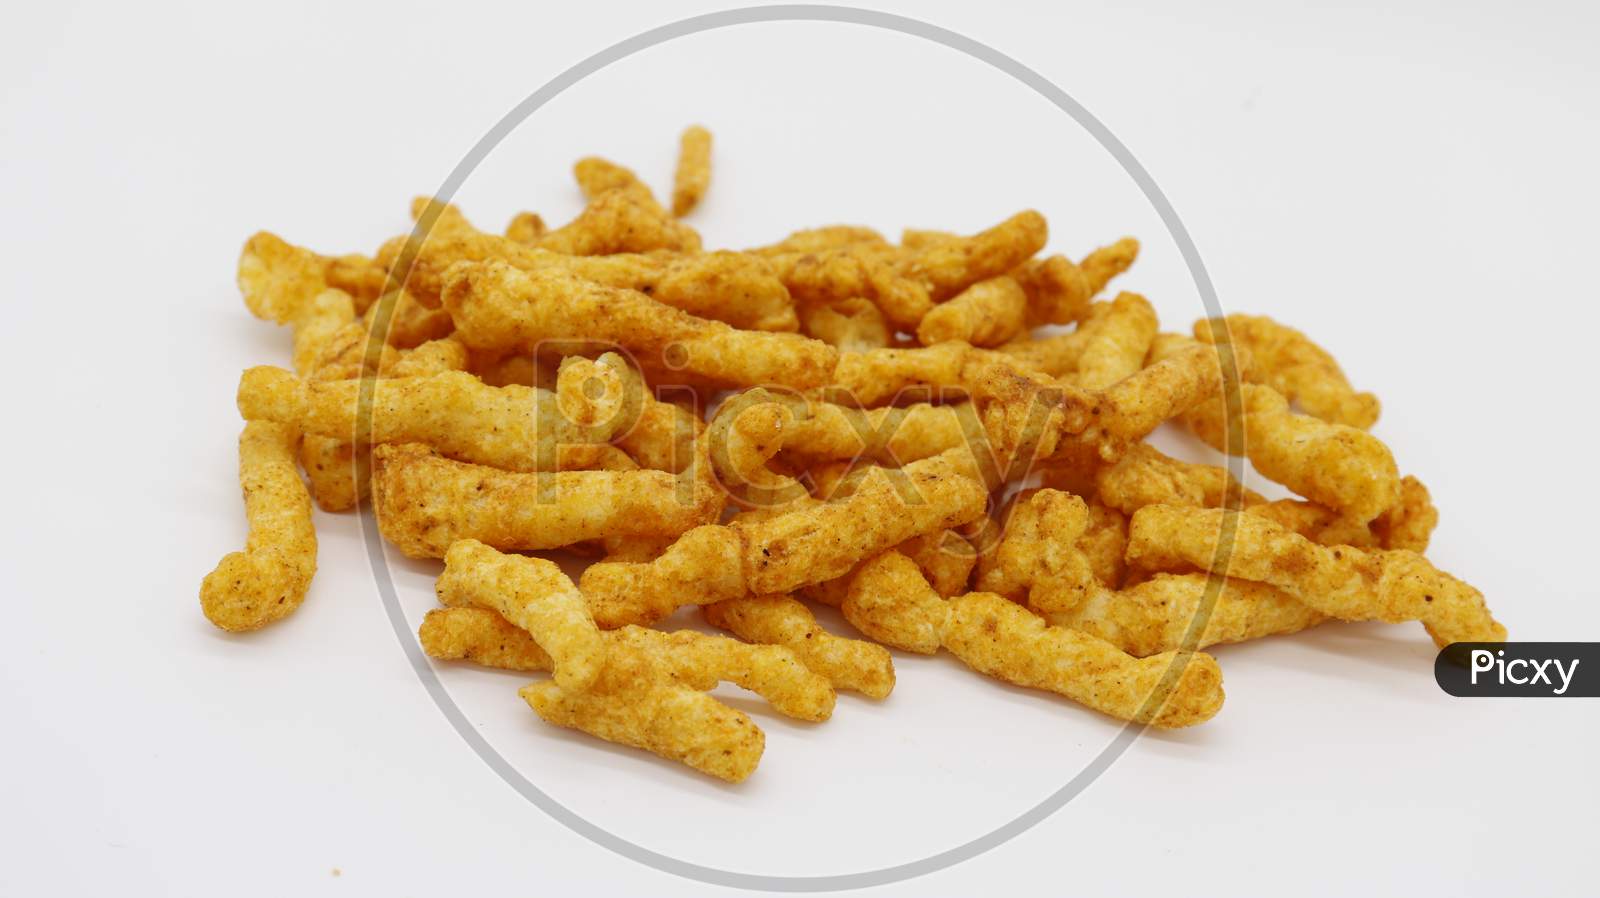 Healthy crunchy snack,Kurkure snack,Evening Snack or the Tea Snack,Kurkure is an evening snack that is manufactured using edible ingredients like rice meal, Background Texture